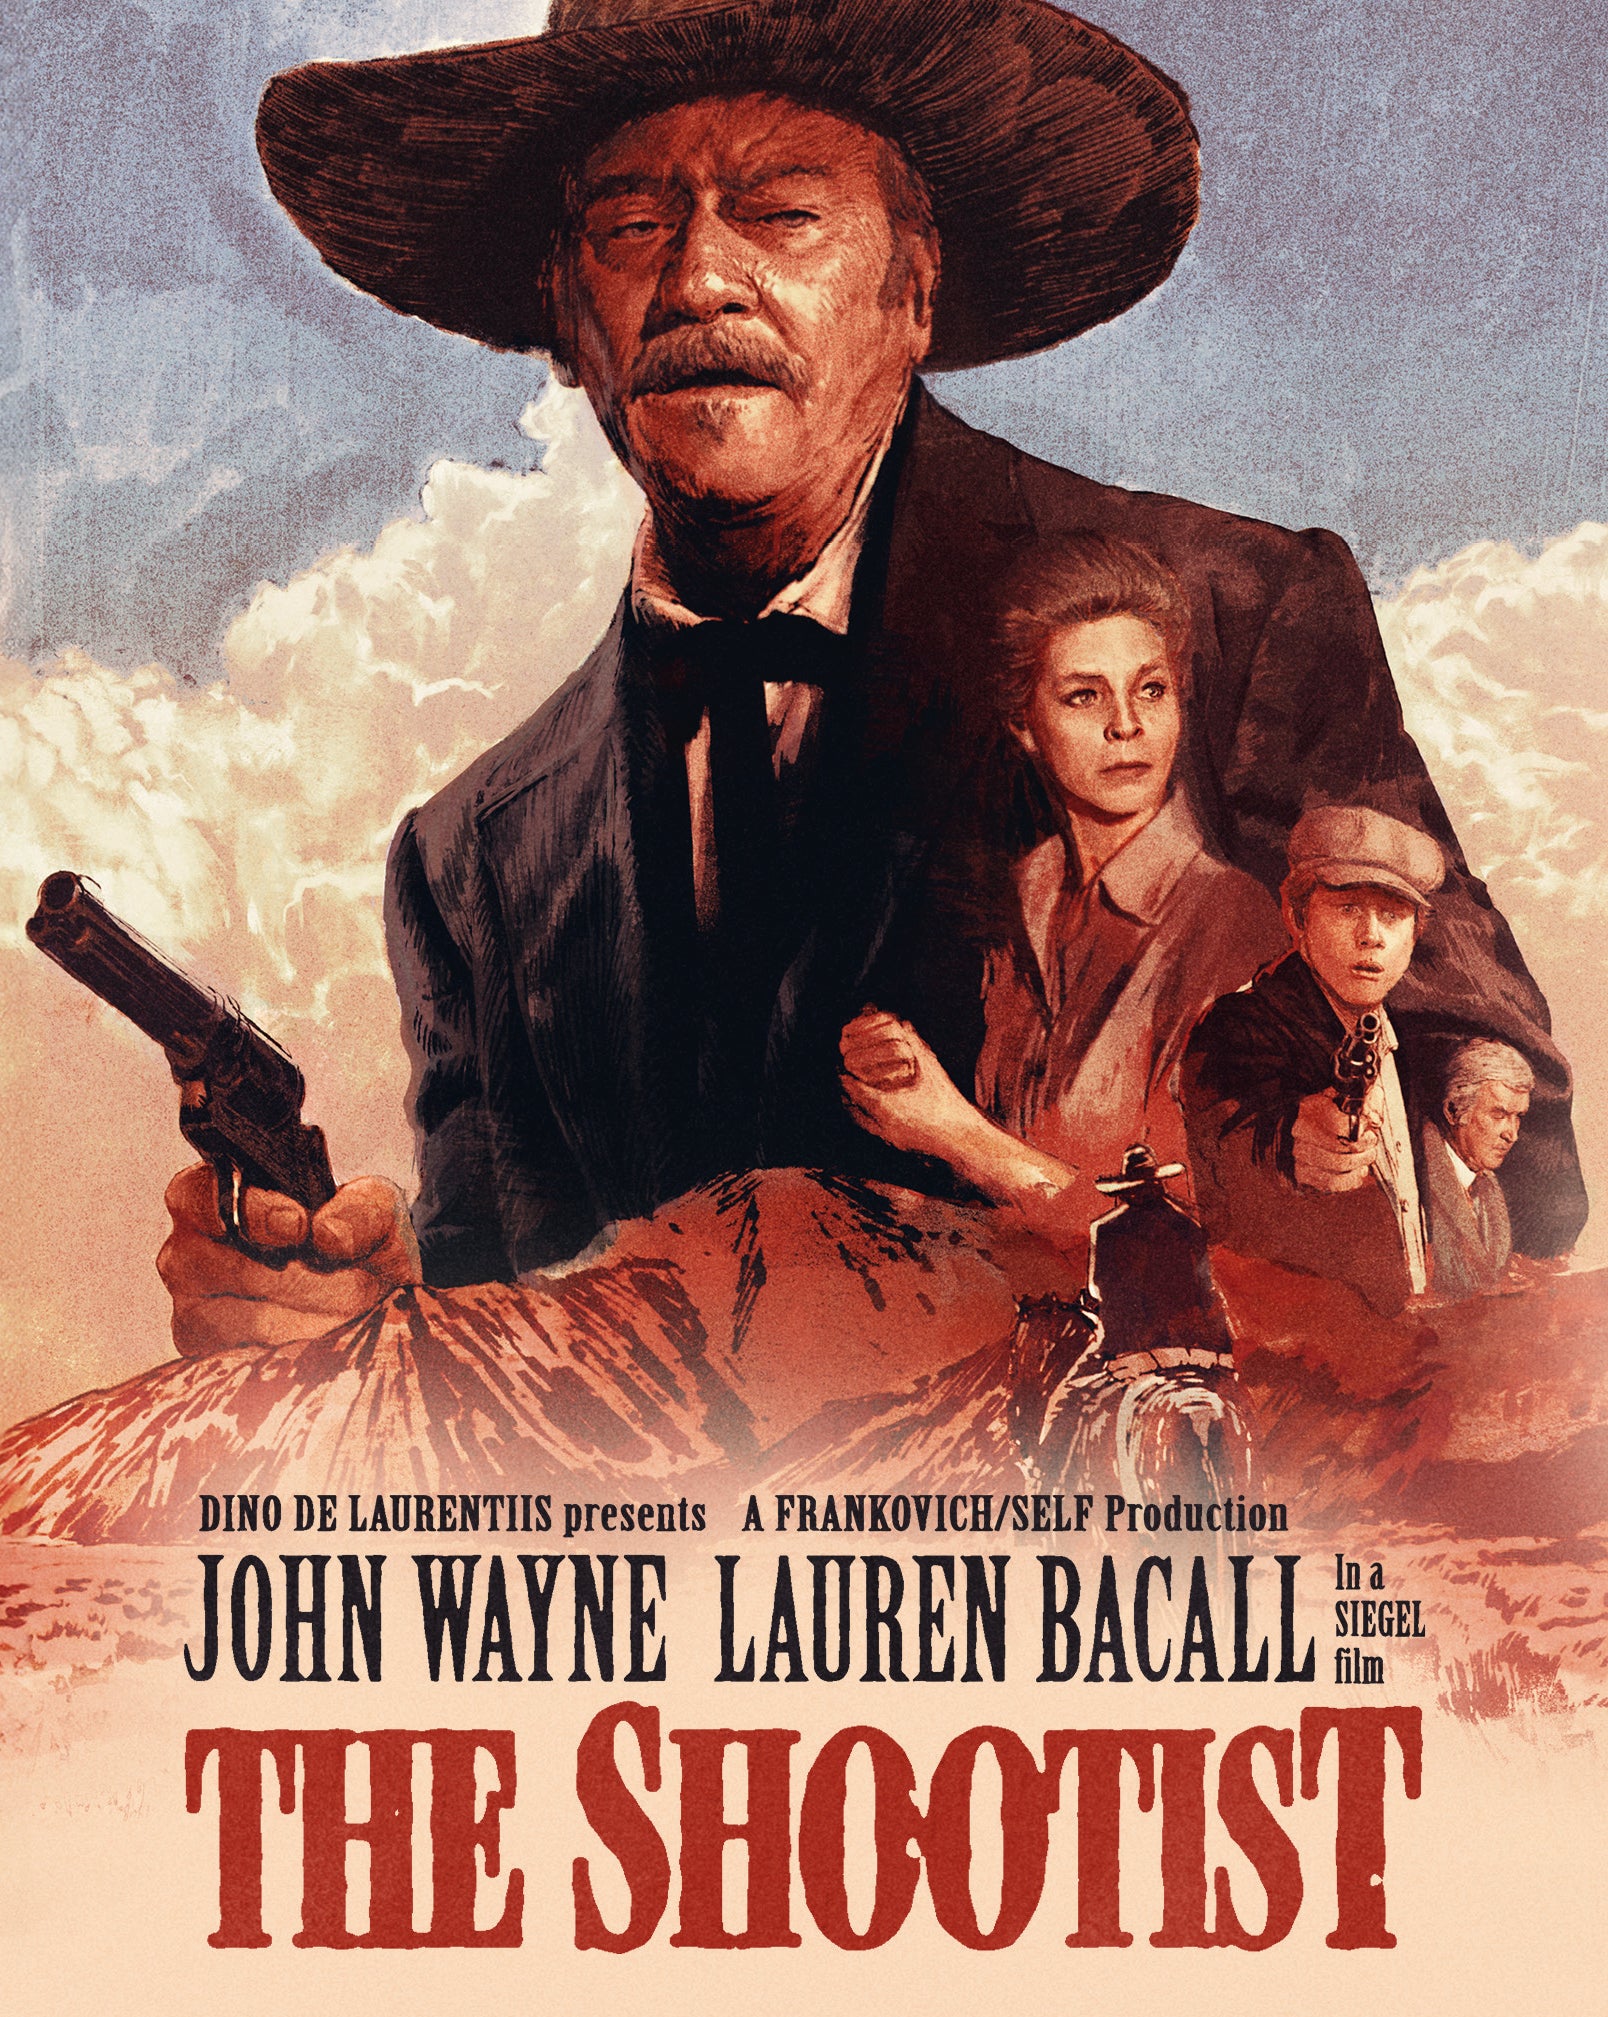 THE SHOOTIST (LIMITED EDITION) BLU-RAY